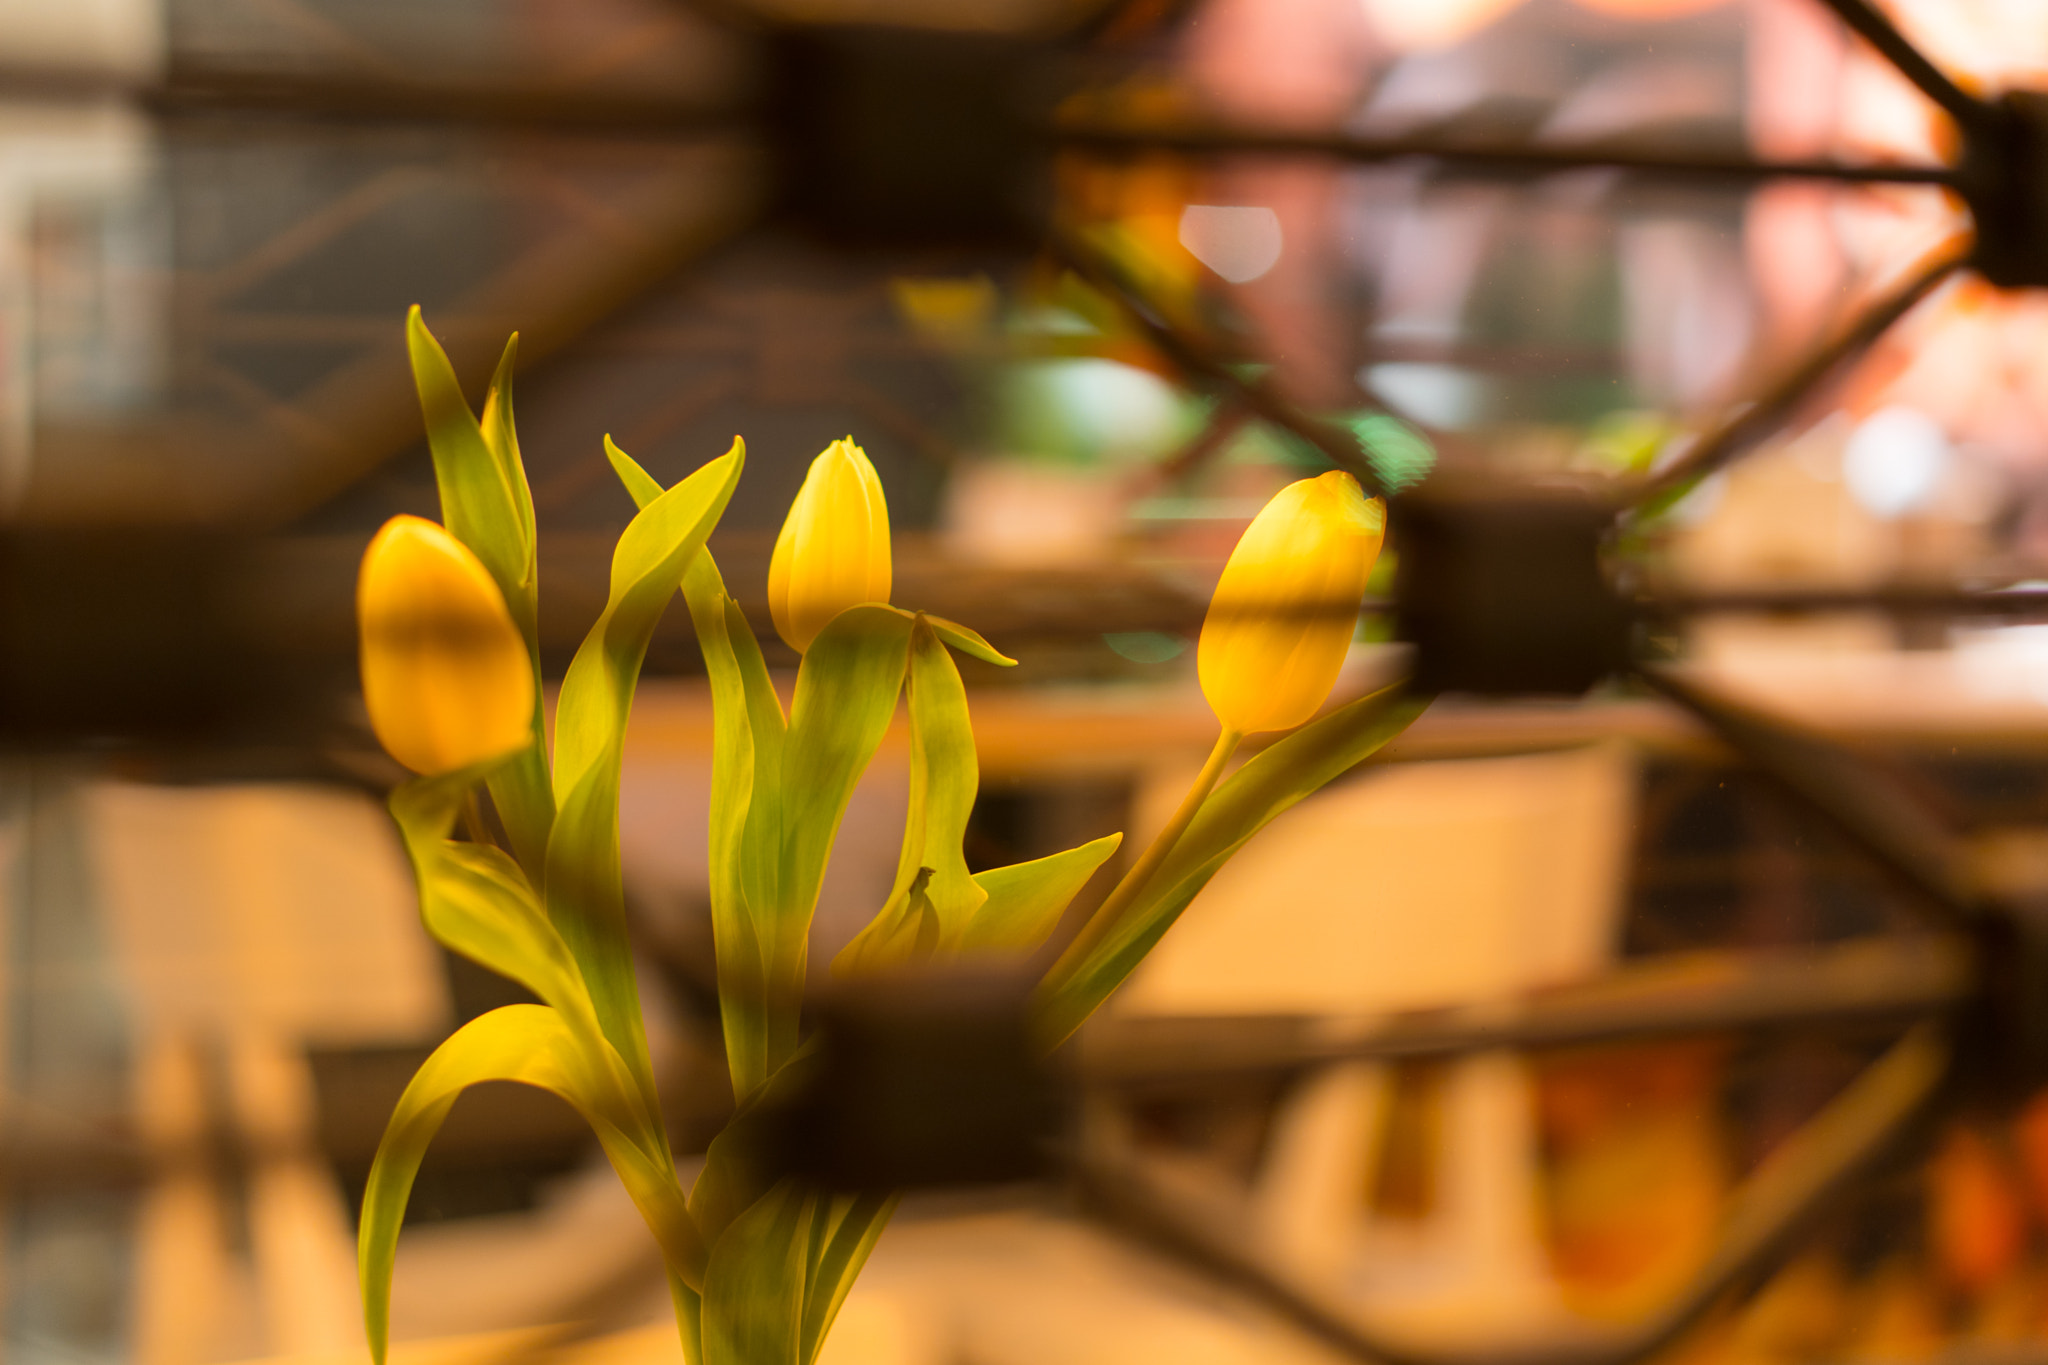 Sony a6500 sample photo. Tulips behind bars photography